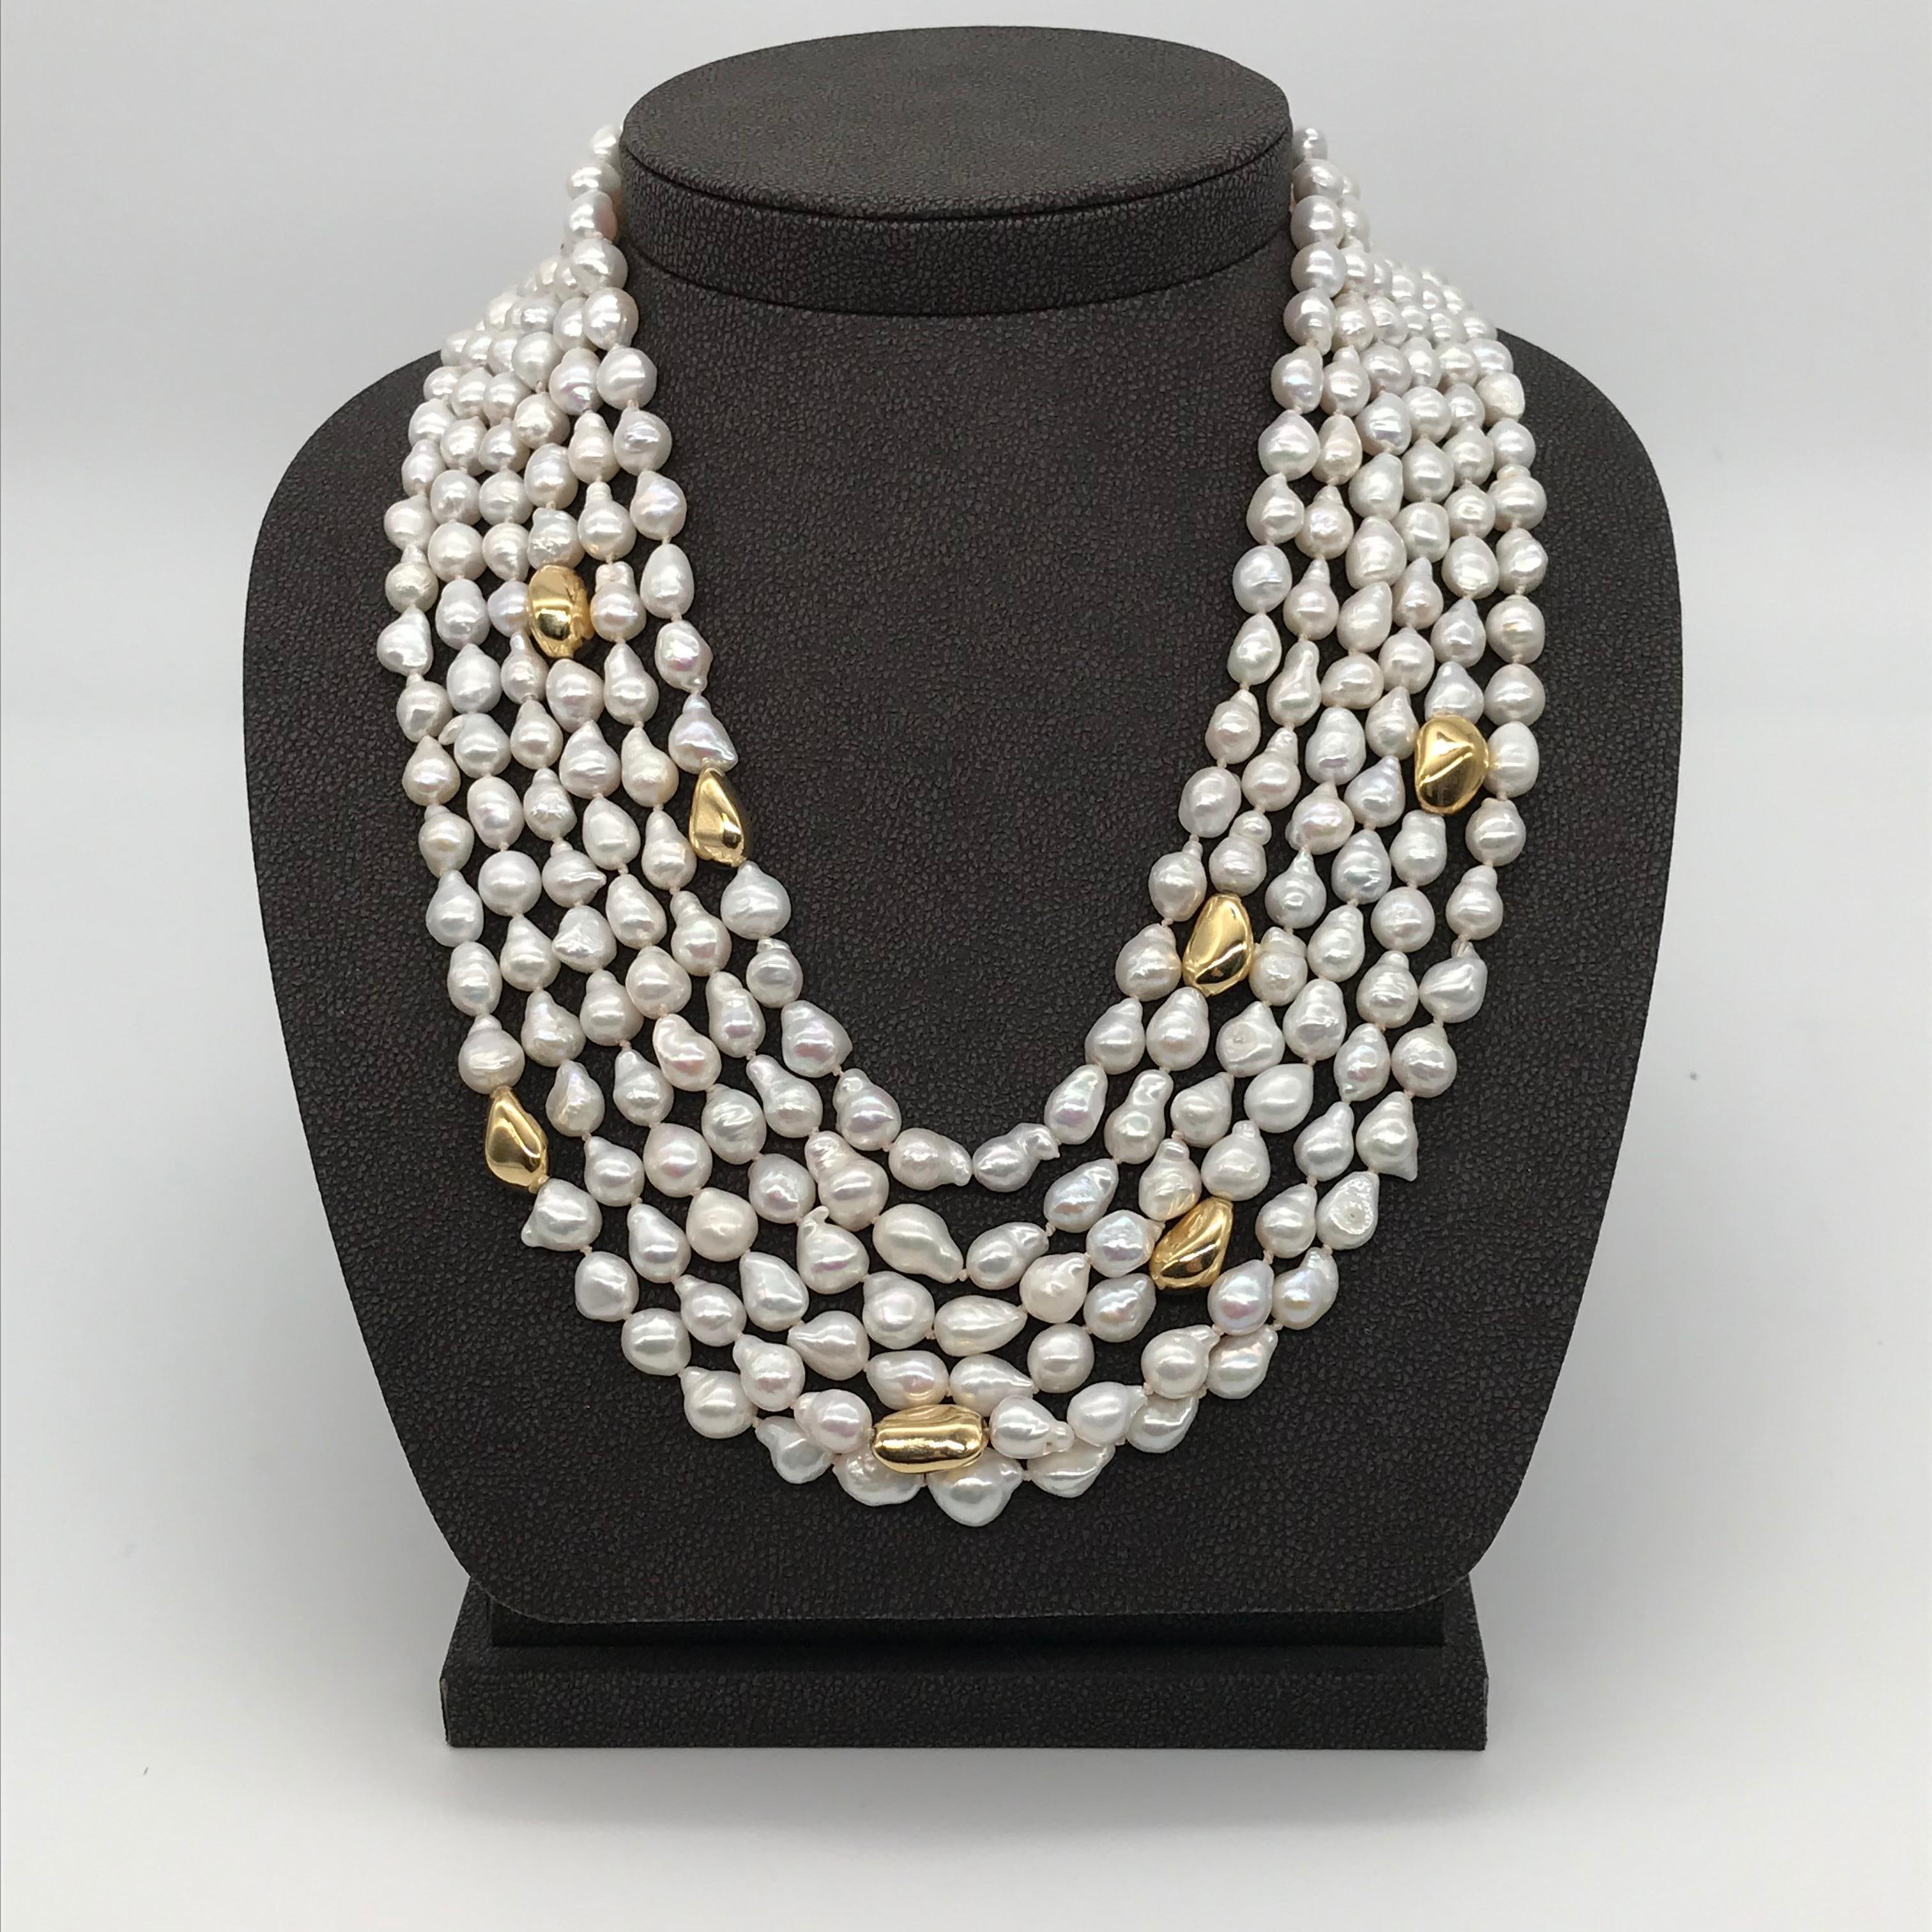 Welcome to the refined, elegant world of our one-of-a-kind necklace: the natural freshwater baroque pearl necklace with bakelite safety clasp on yellow gold. This exceptional piece embodies the perfect fusion between the organic beauty of baroque